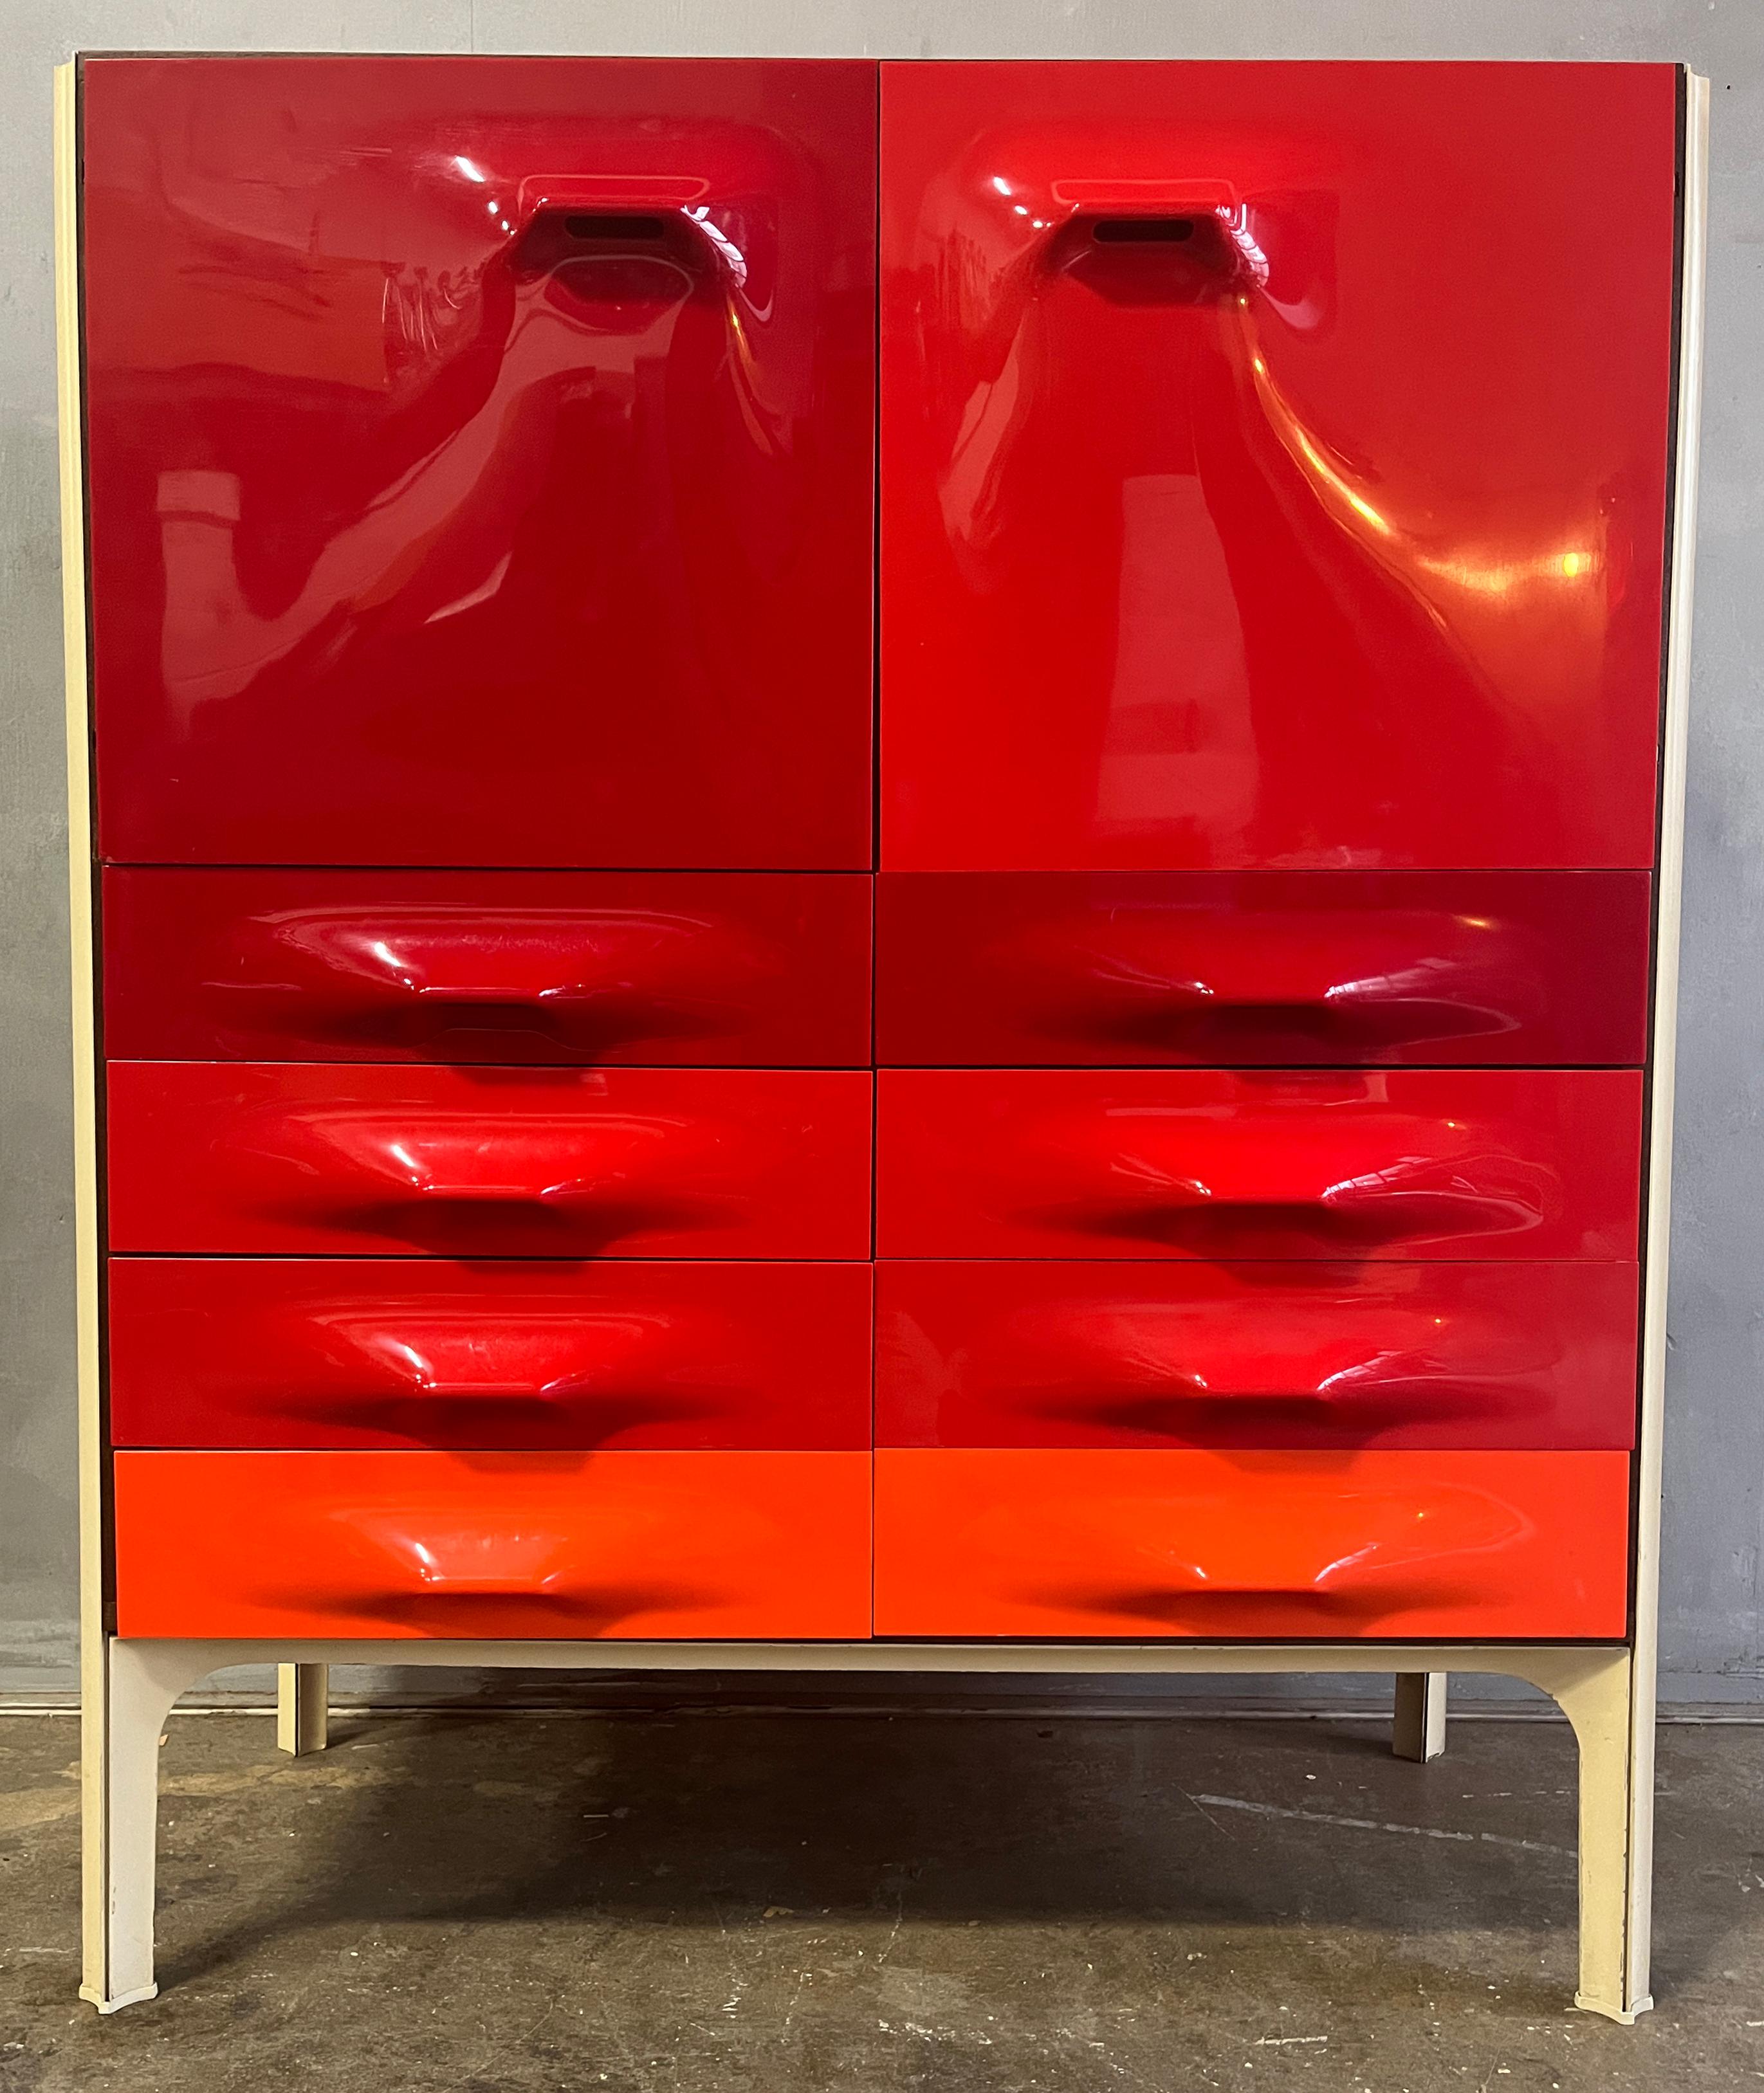 Mid-century Raymond Loewy DF-2000 dresser for Doubinsky Frères, France in 1969. Hard to find red fronts.
These cabinets almost always have chips to the panels. This one is very clean with only one minor worn down corner to one panel as shown in